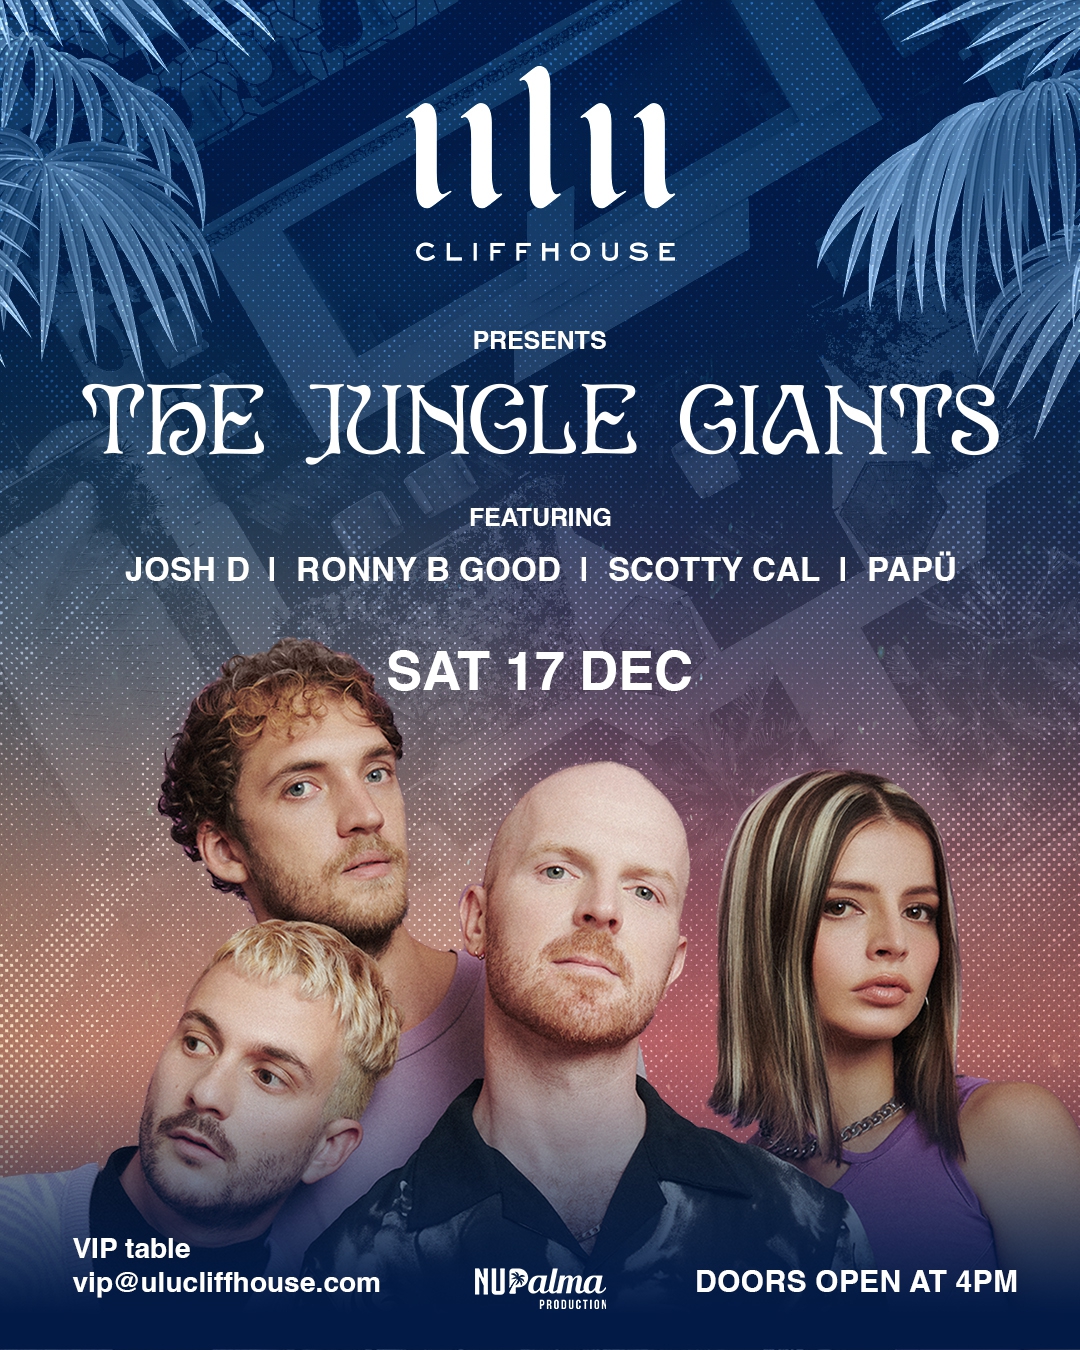 ULU CLIFFHOUSE PRESENT THE JUNGLE GIANTS – SATURDAY DECEMBER 17TH thumbnail image